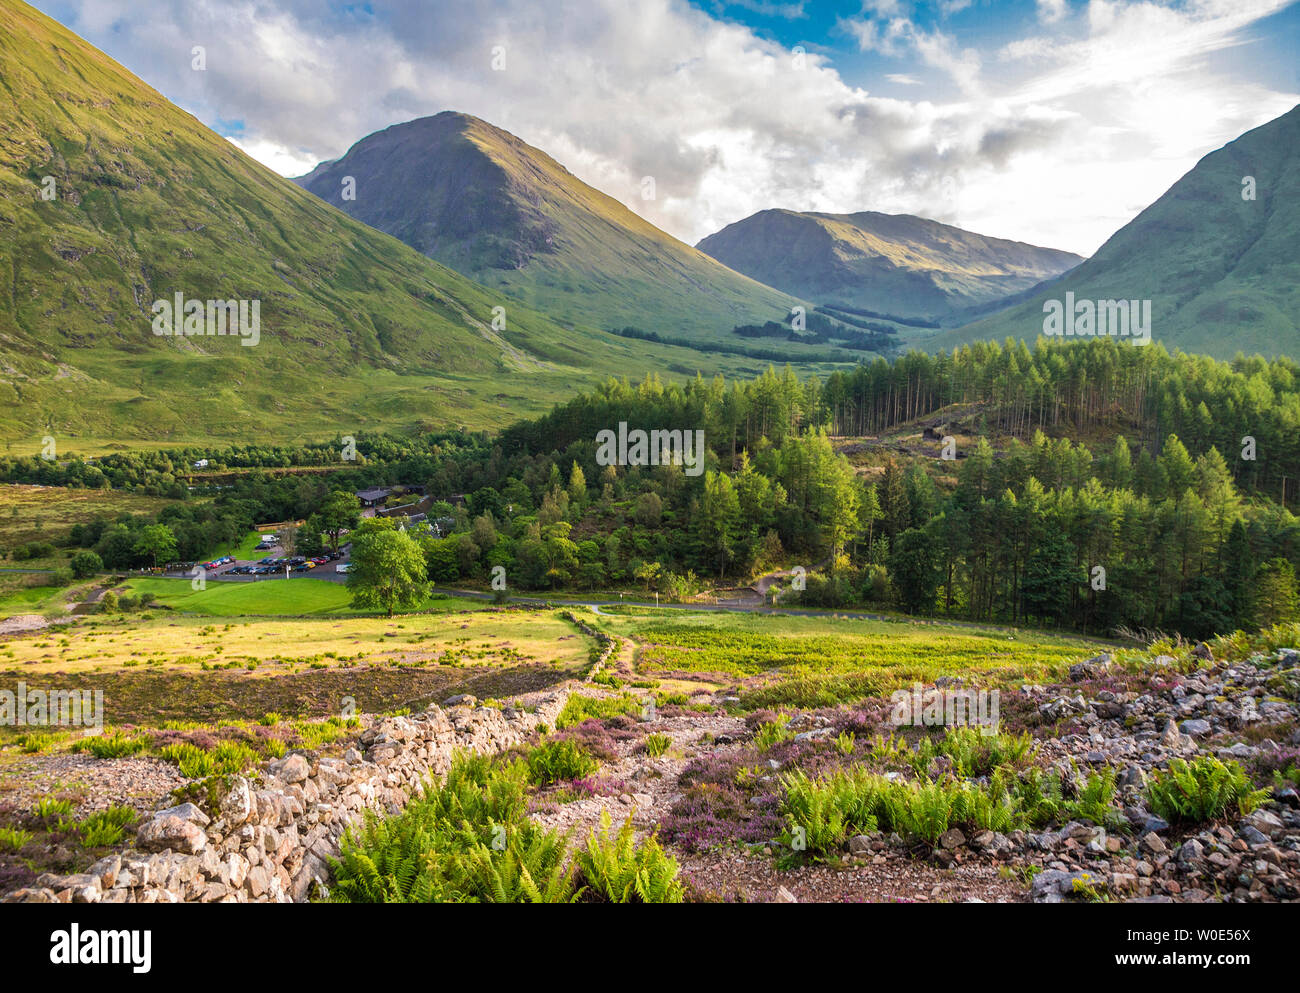 Europe, Great Britain, Scotland, Highlands and Lochaber Geopark, Glen Coe valley, place of Hagrid's hut replica (Harry Potter movie) and filming of the Skyfall movie (James Bond) Stock Photo